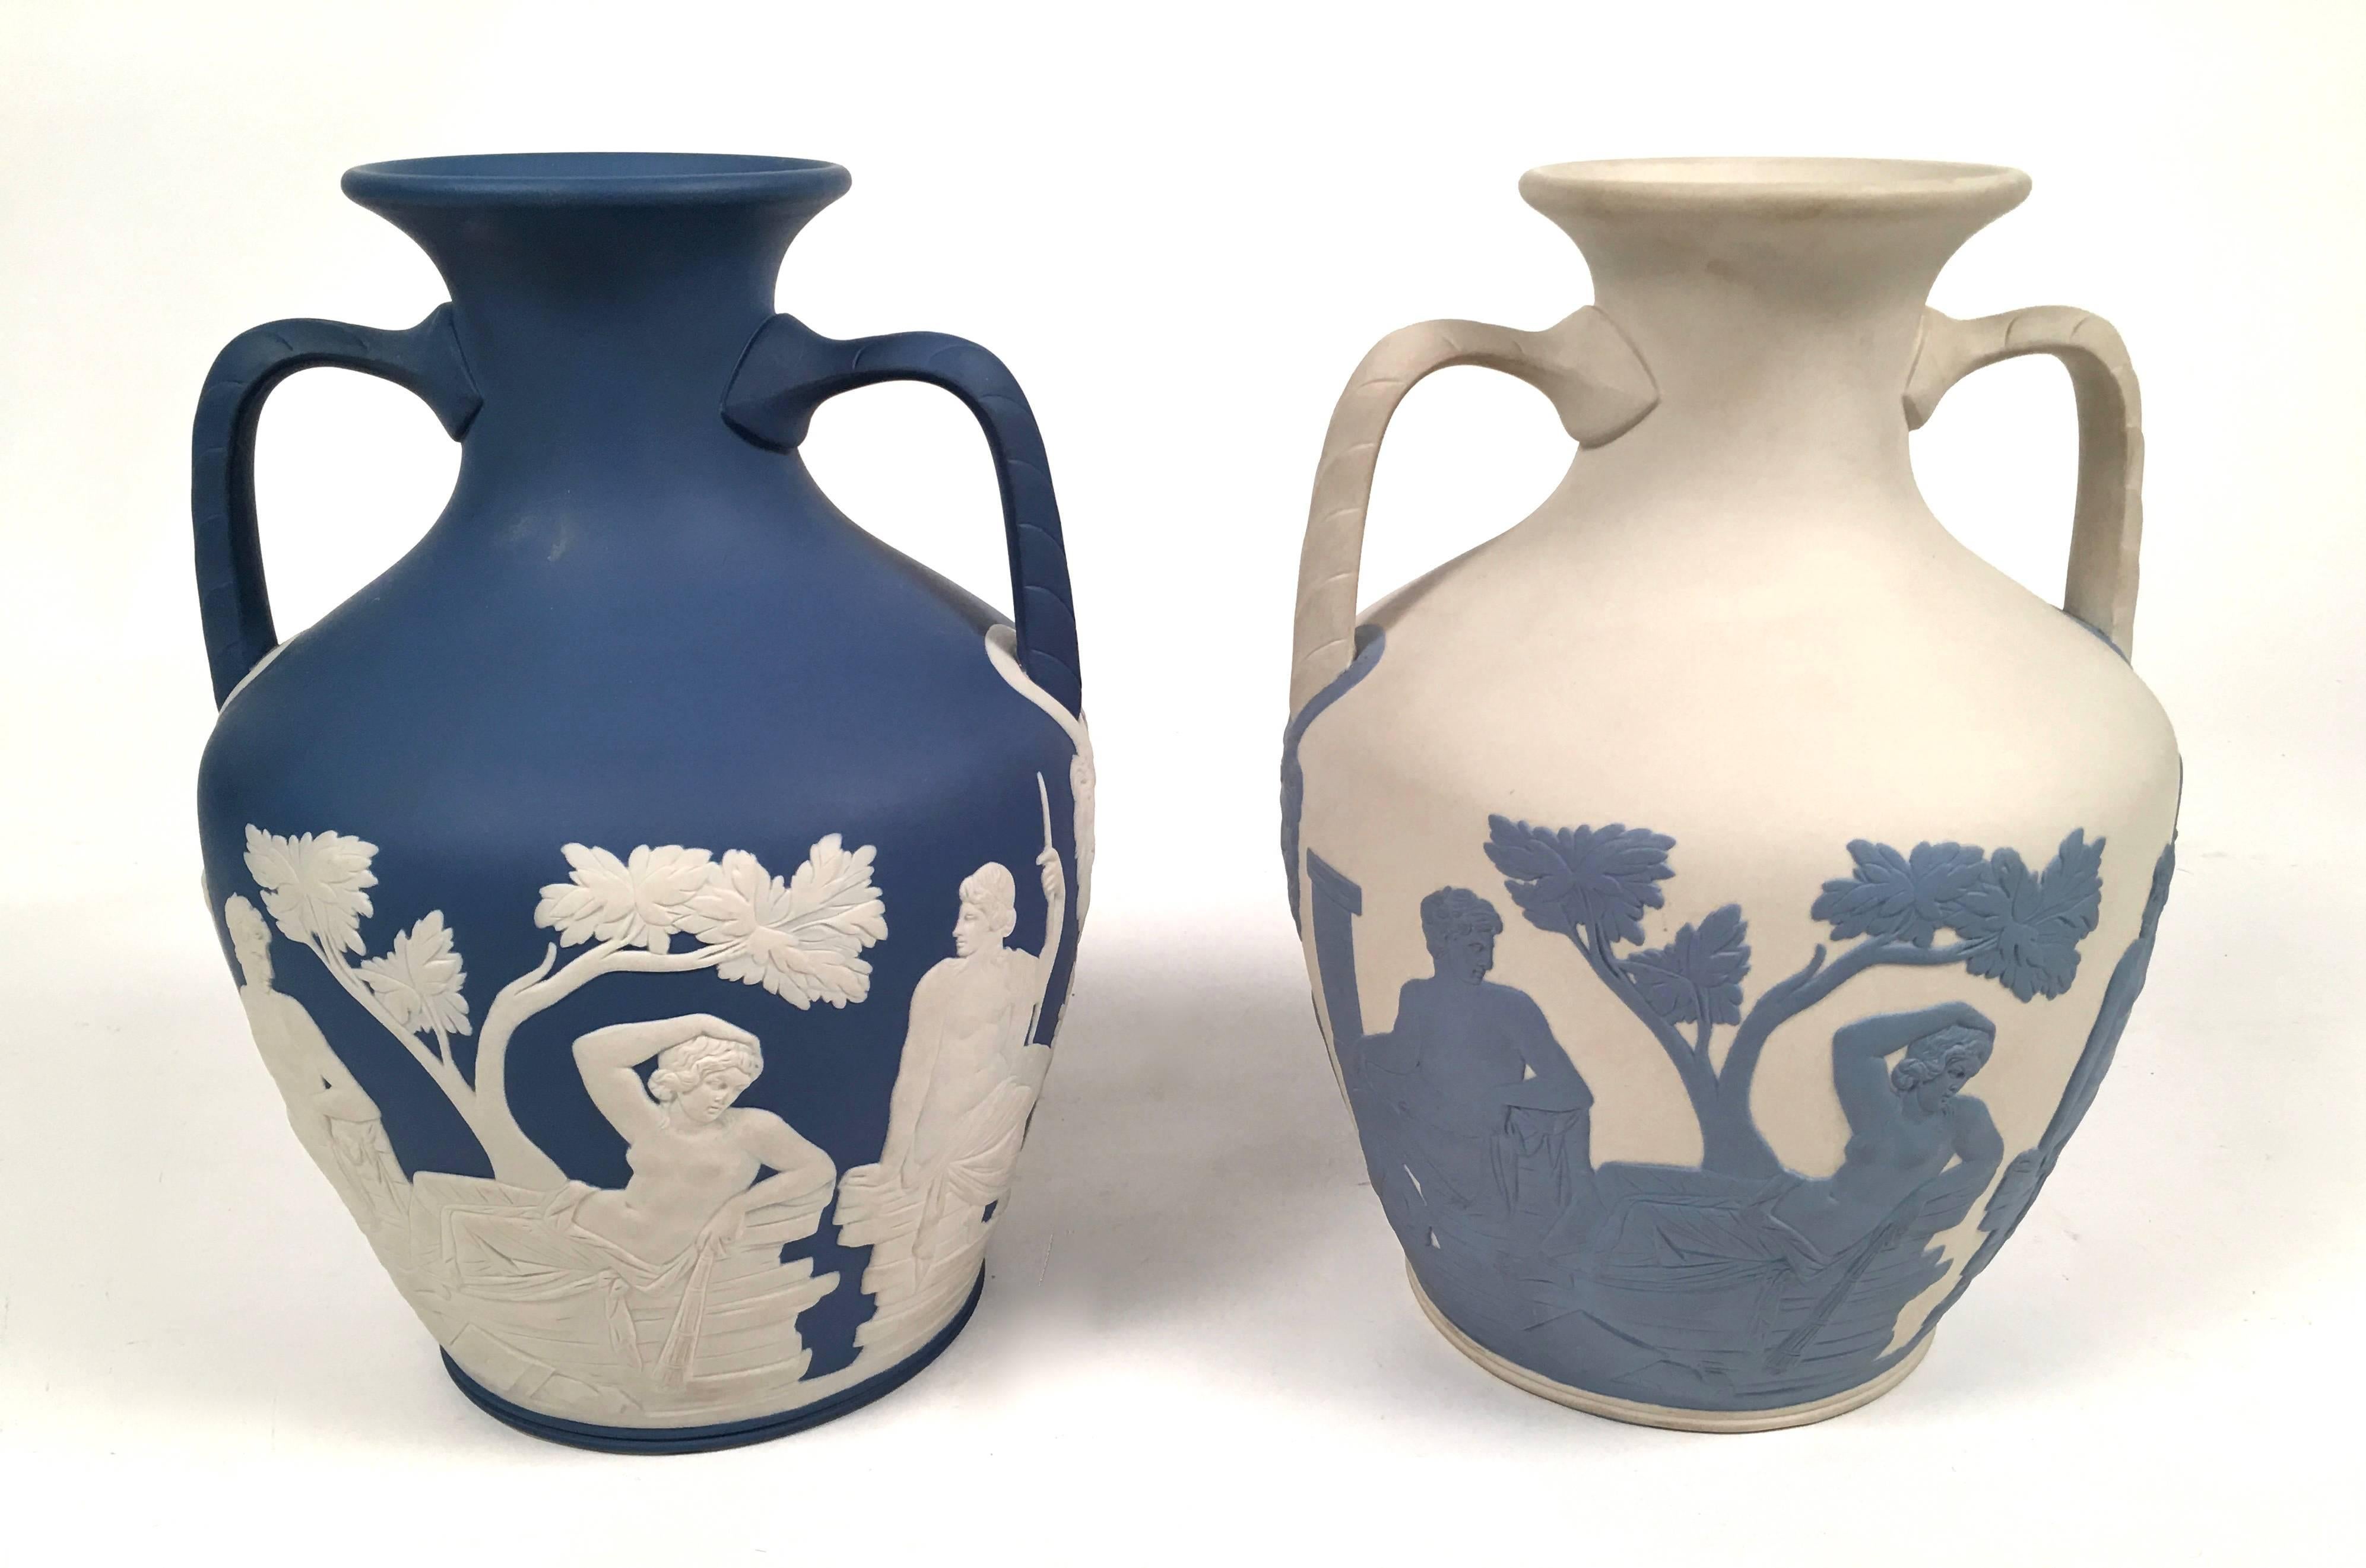 Glazed Rare Collection of Five English Pottery Portland Vases